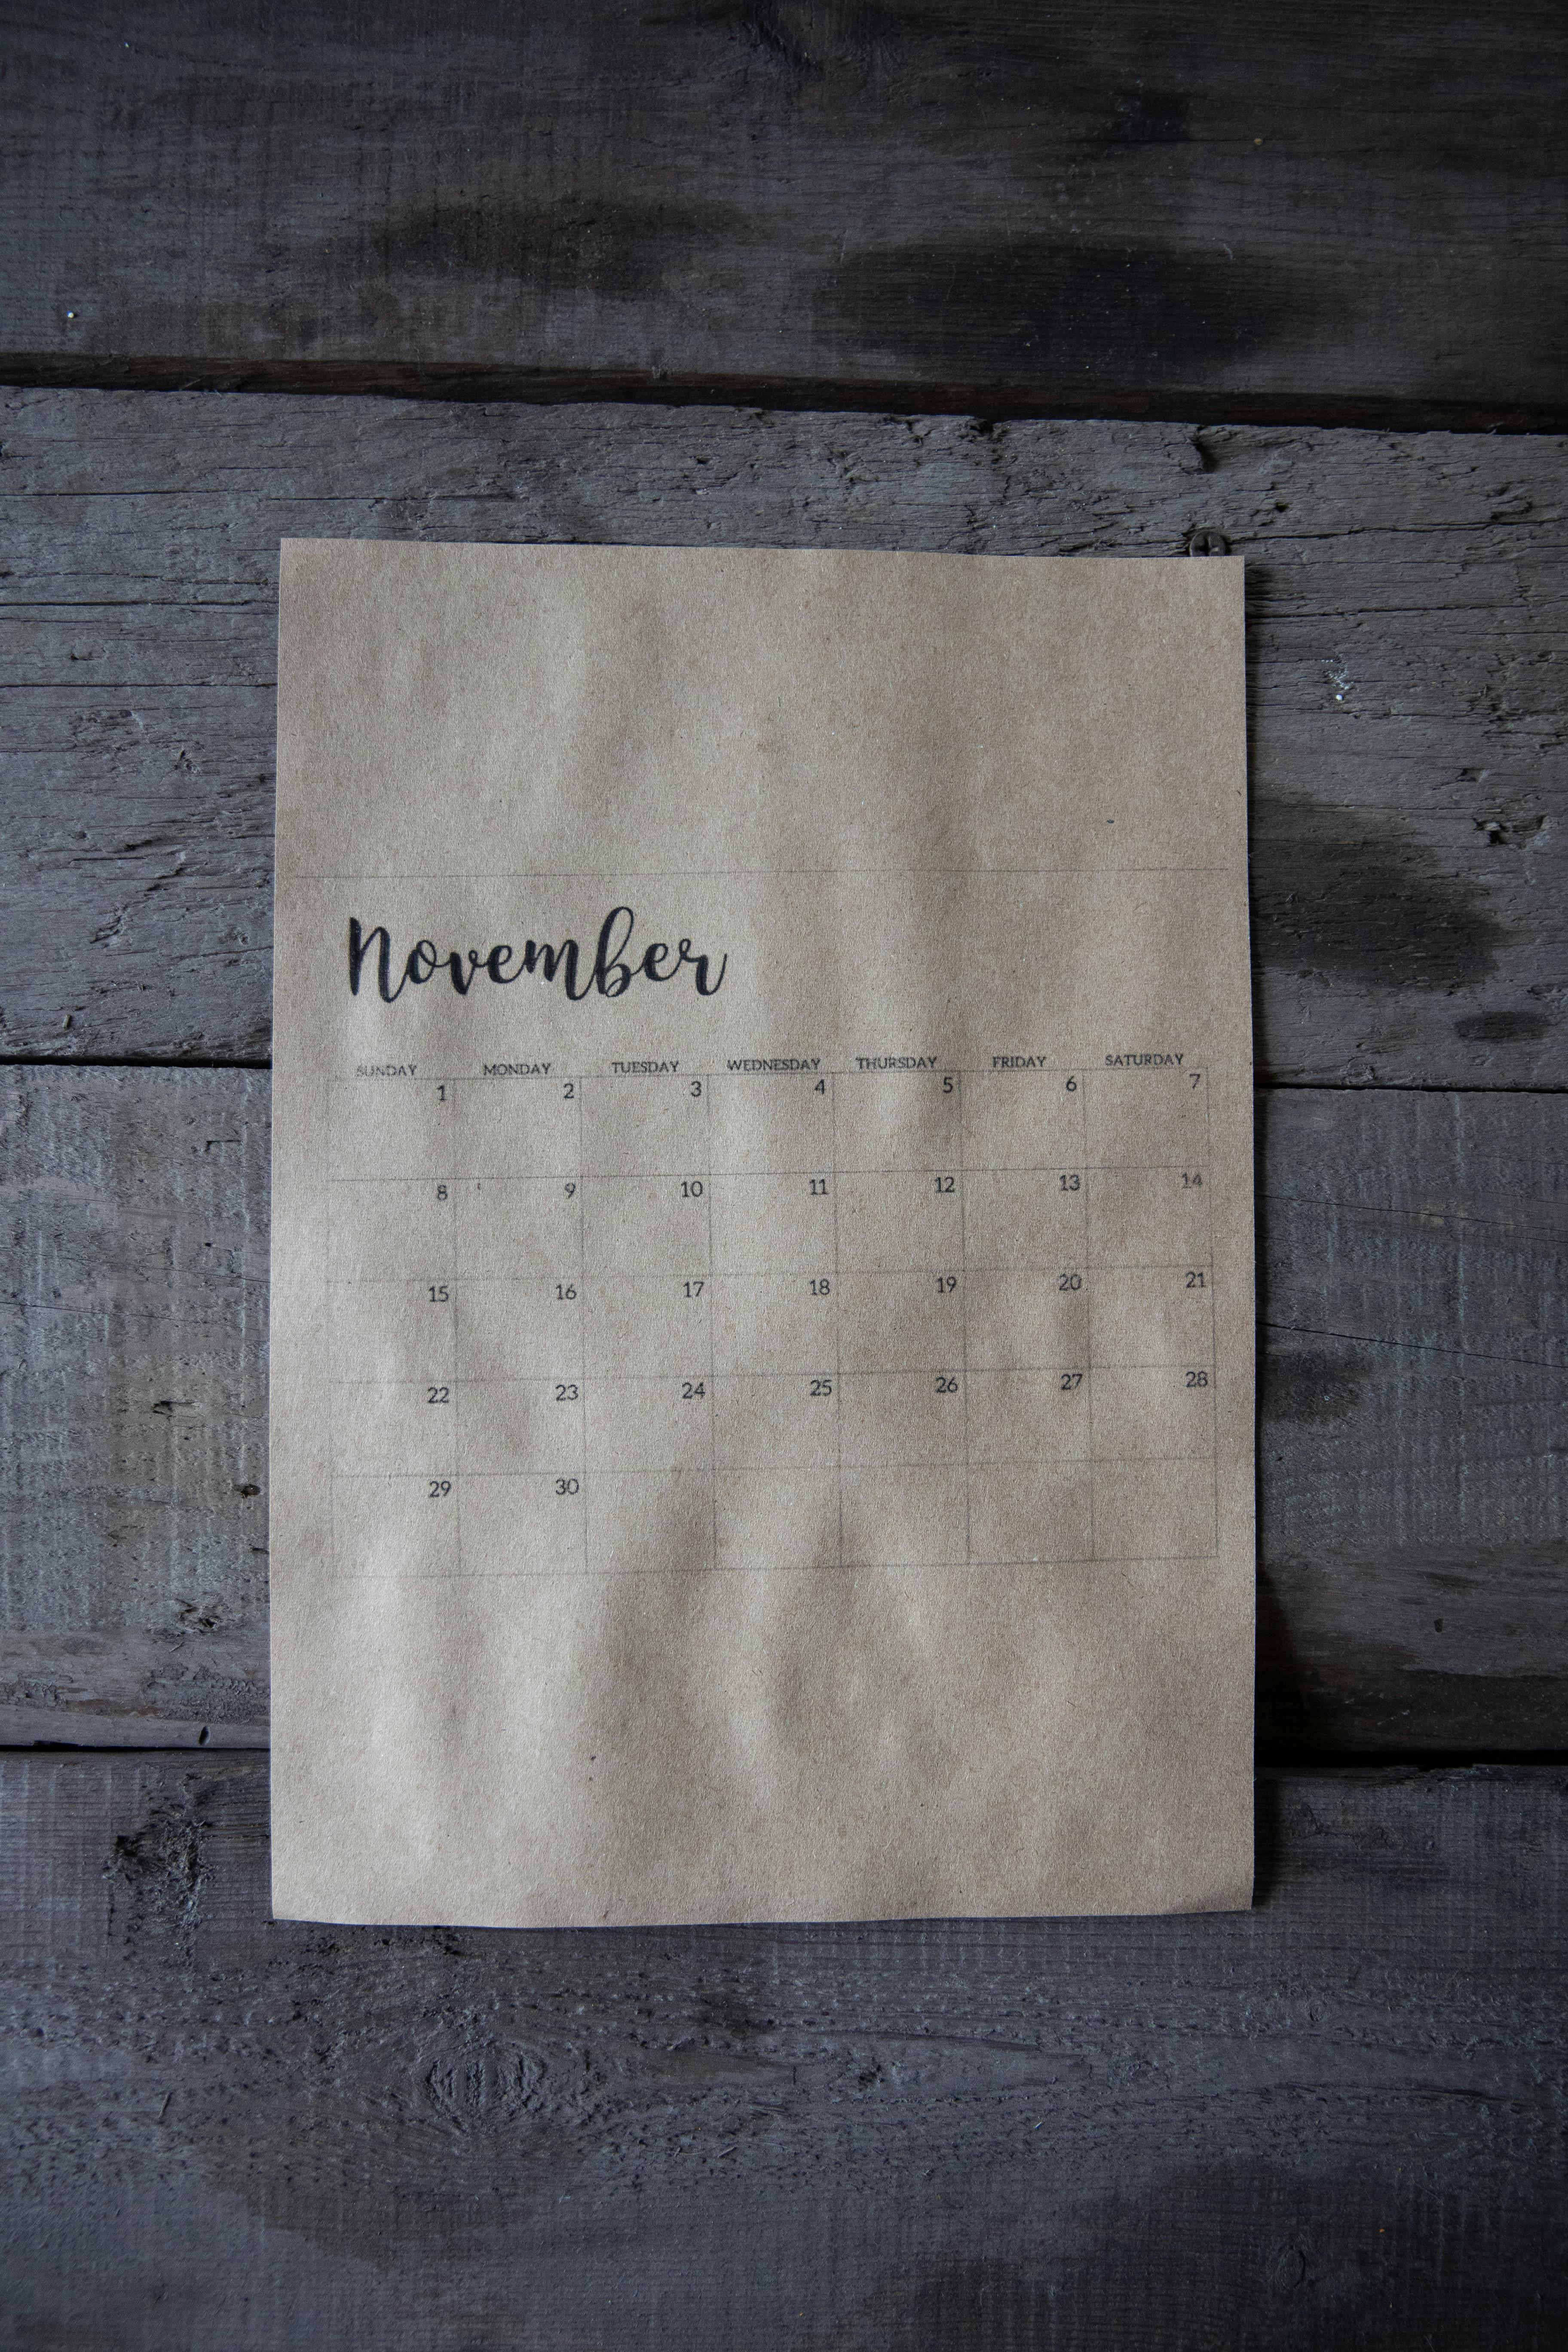 A calendar for the month of November | Source: Pexels